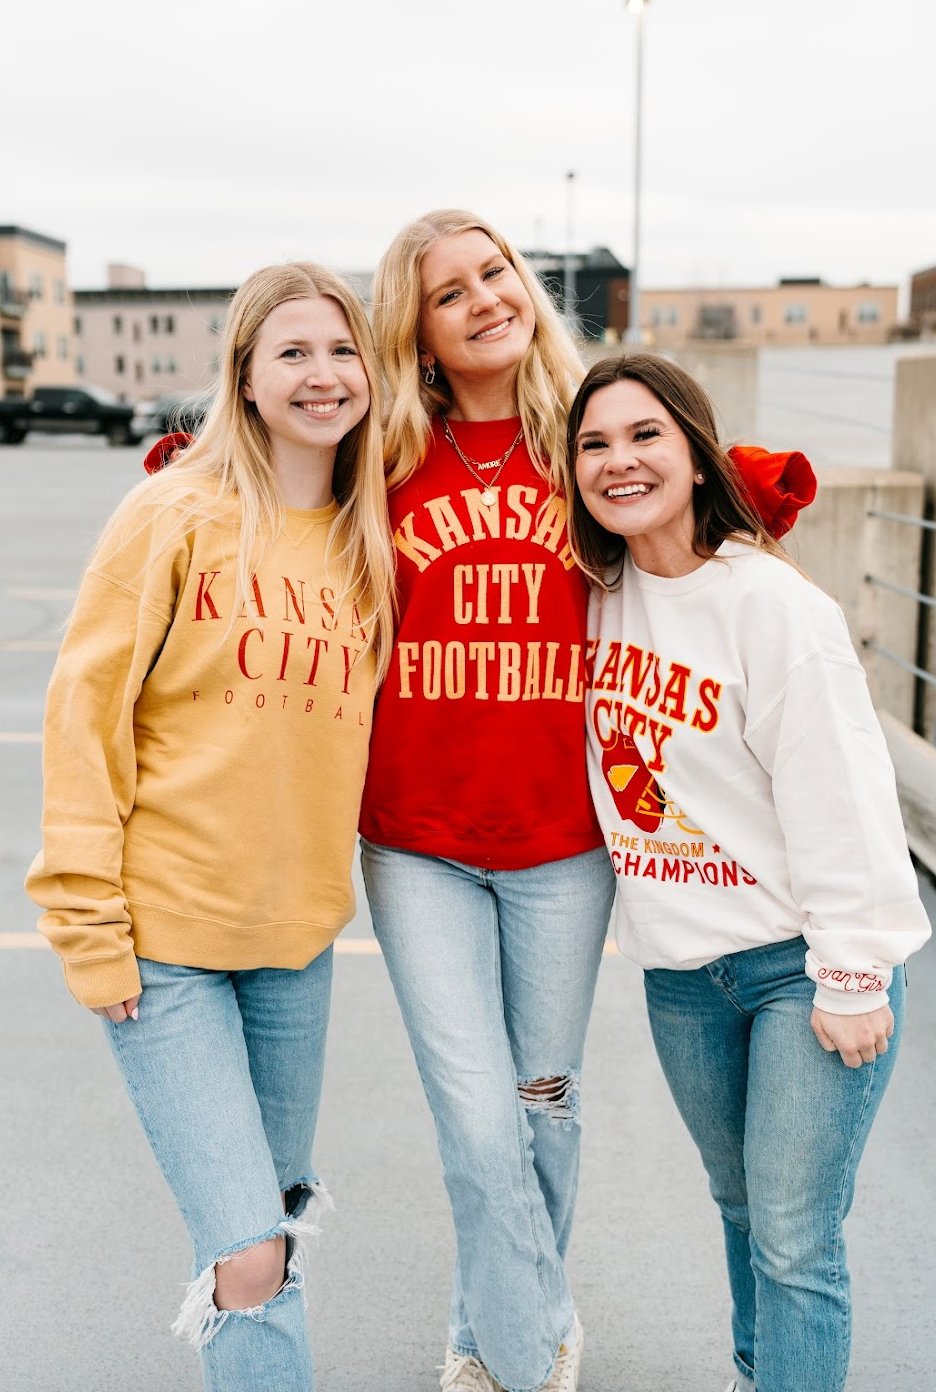 Are we excited for the Super Bowl this year? - Fan Girl Clothing